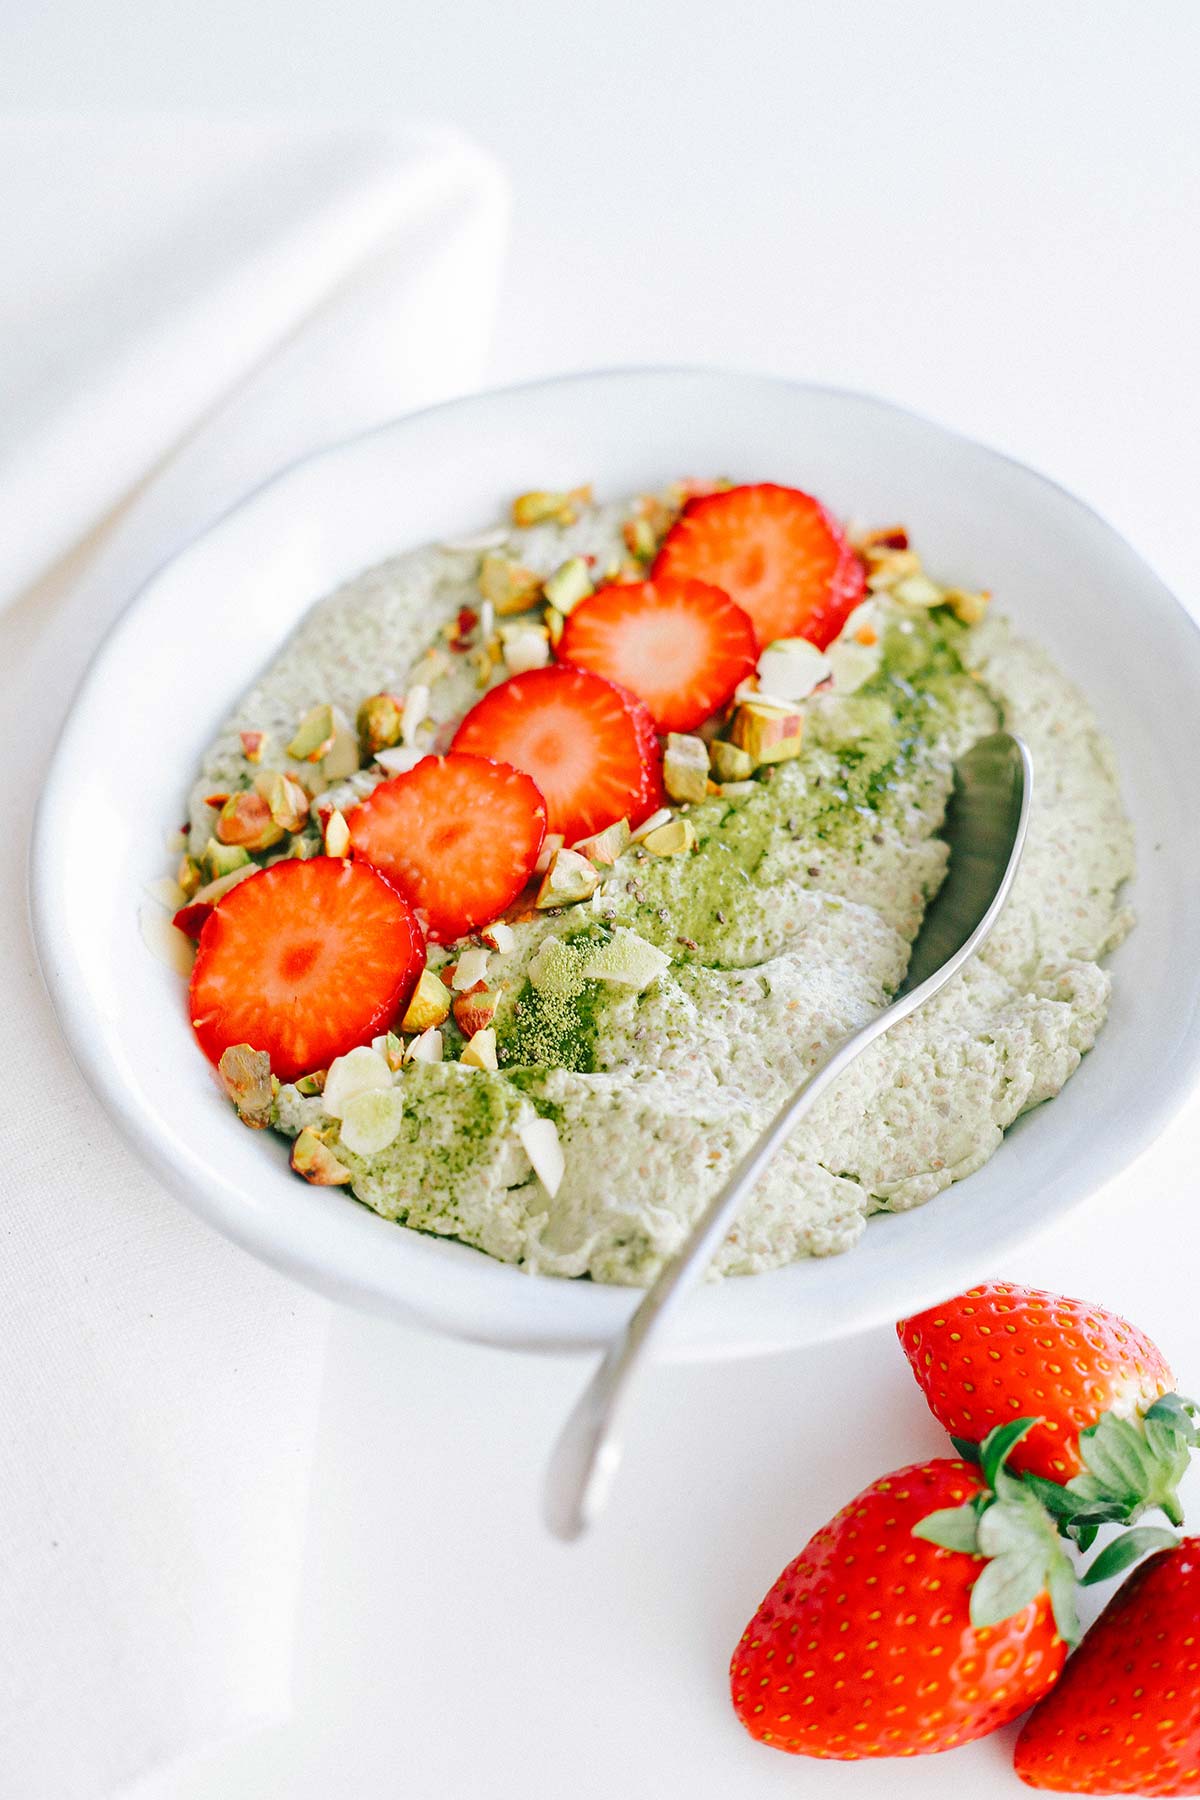 Keto Matcha Chia Pudding for ketogenic and low carb. Easy recipe with chia seeds and coconut milk. keto, matcha, keto chia pudding, matcha chia pudding, keto chia seed recipes, keto chia seed pudding, keto chia pudding low carb, keto breakfast, matcha recipes, keto recipes, ketogenic diet, keto dessert, keto easy recipes, keto easy, matcha pudding, keto meals, keto quick meals, keto recipes easy, low carb, low carb recipes, low carb chia pudding, lchf, lchf recipes